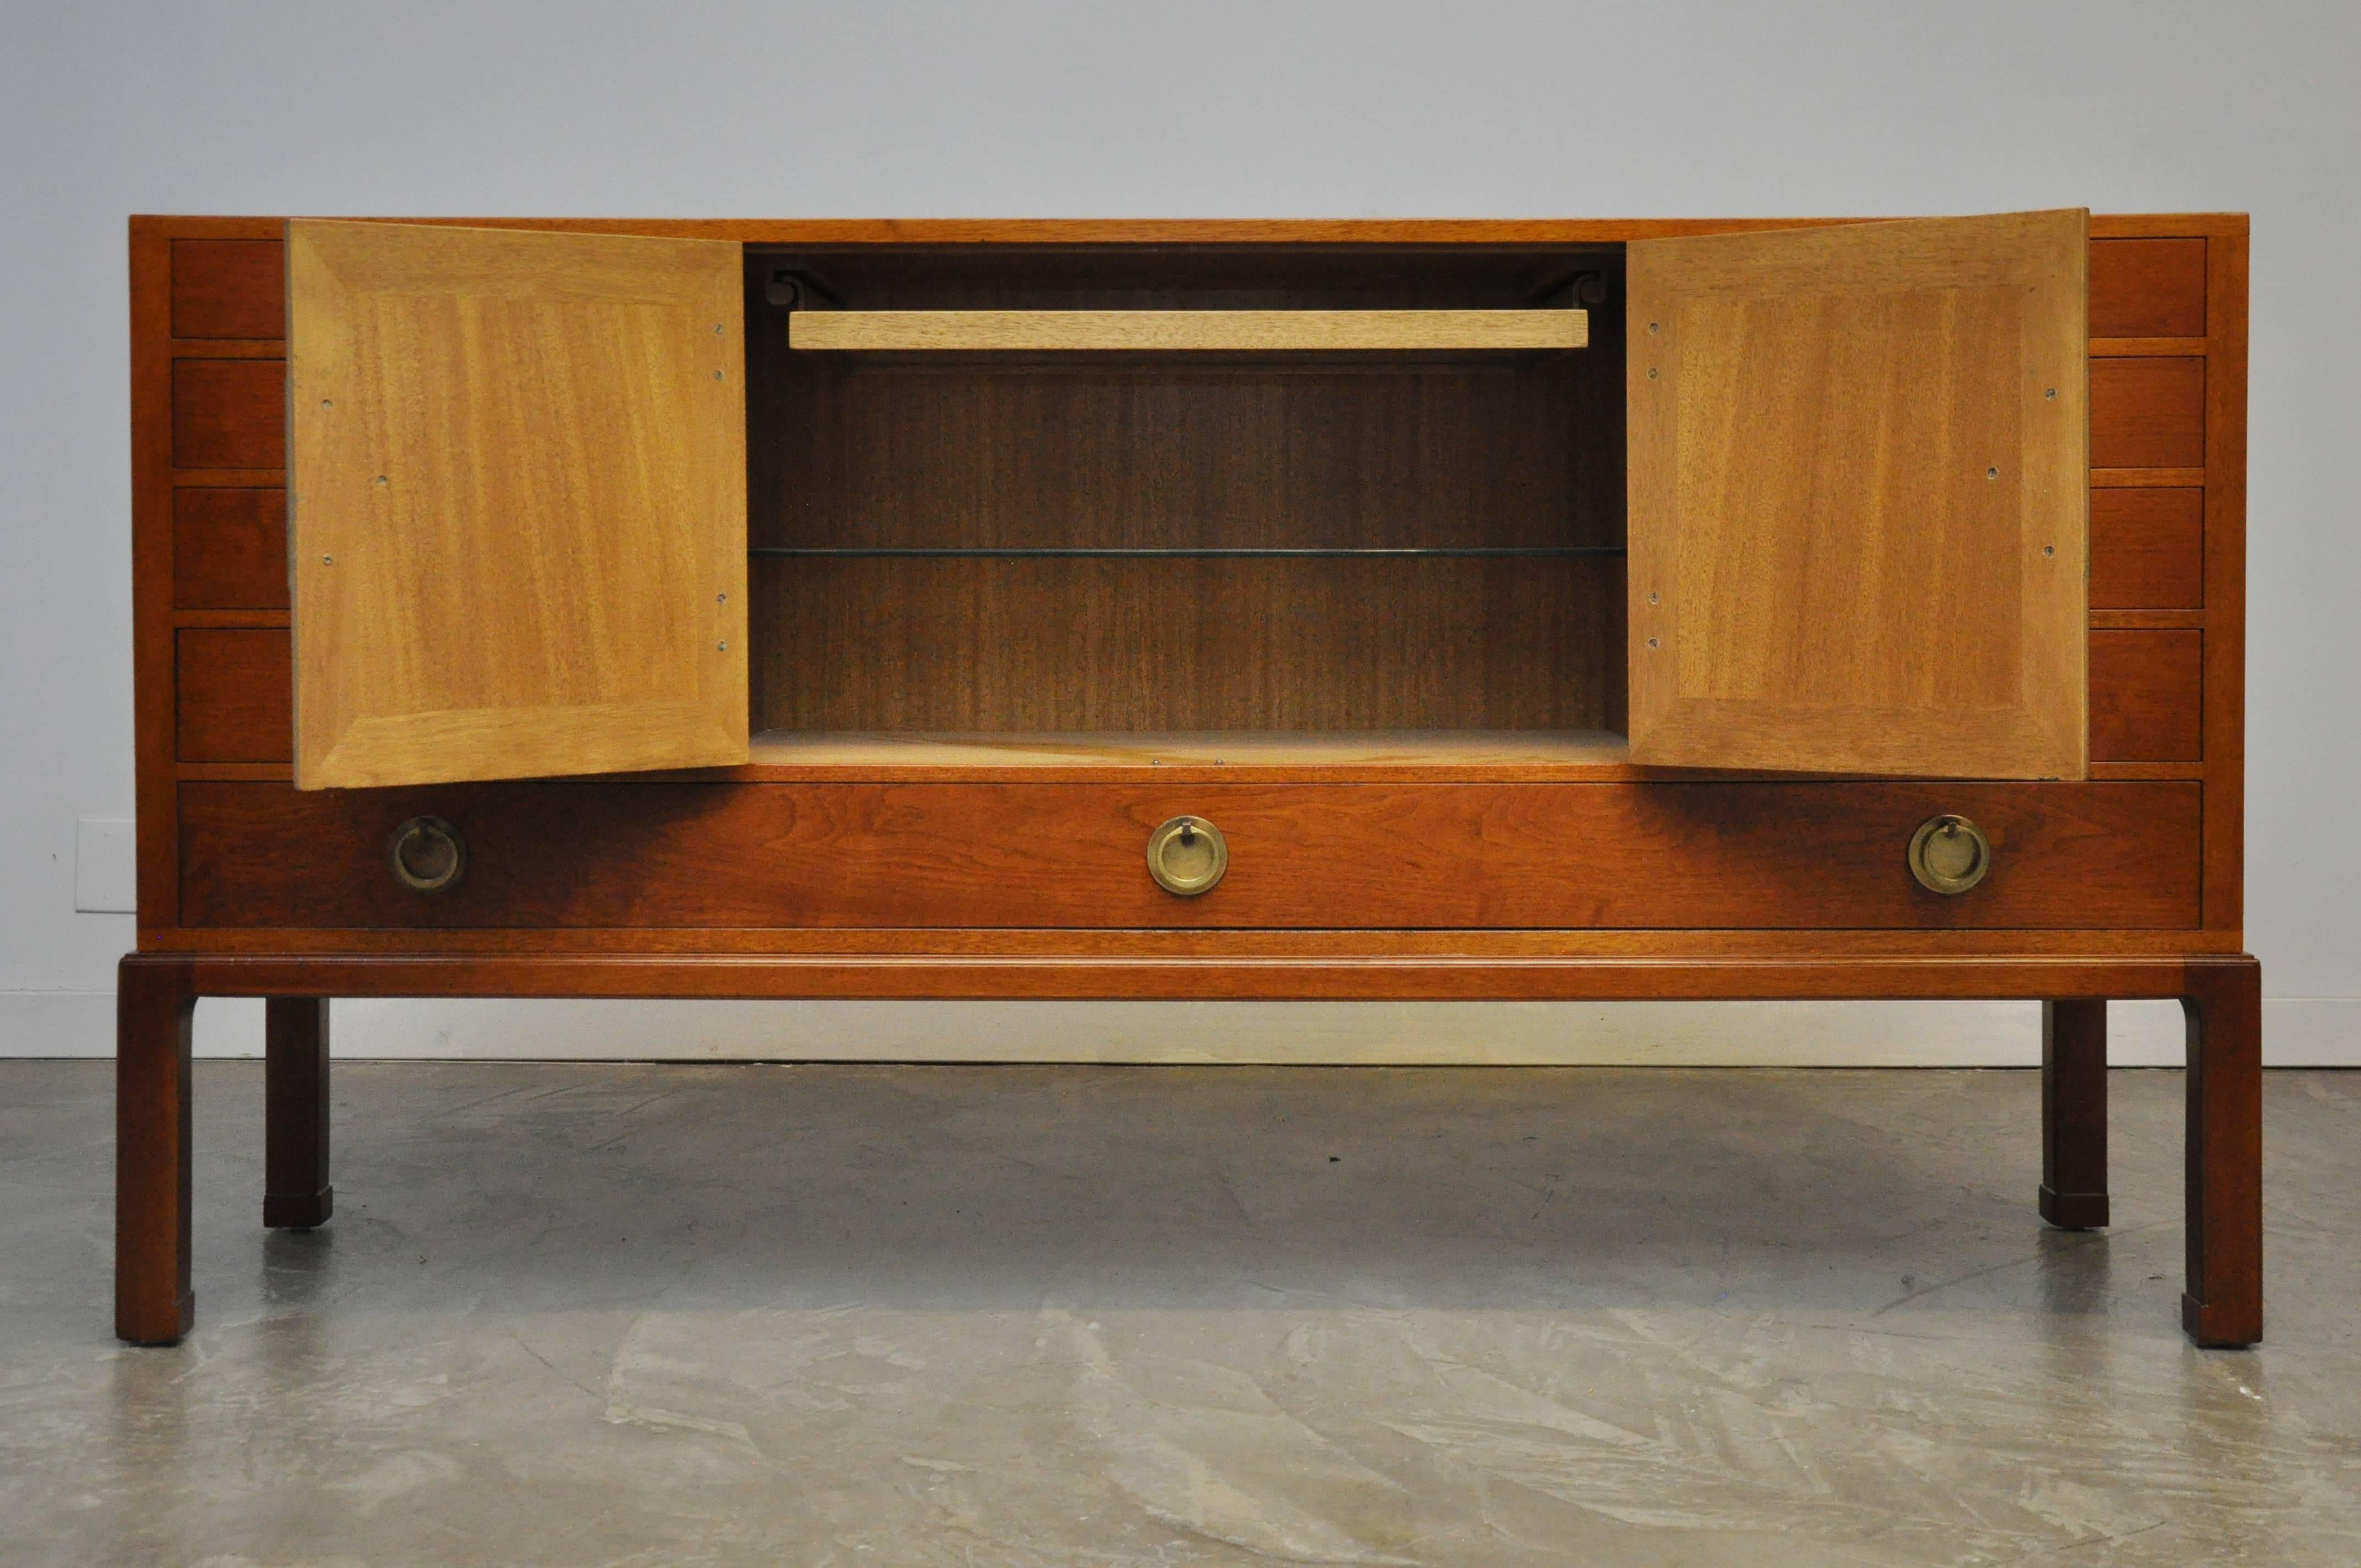 Beautiful sideboard designed by Edward Wormley for Dunbar in 1945, model 4579. The center compartment features an adjustable glass shelf and a removable glass-bottom tray.